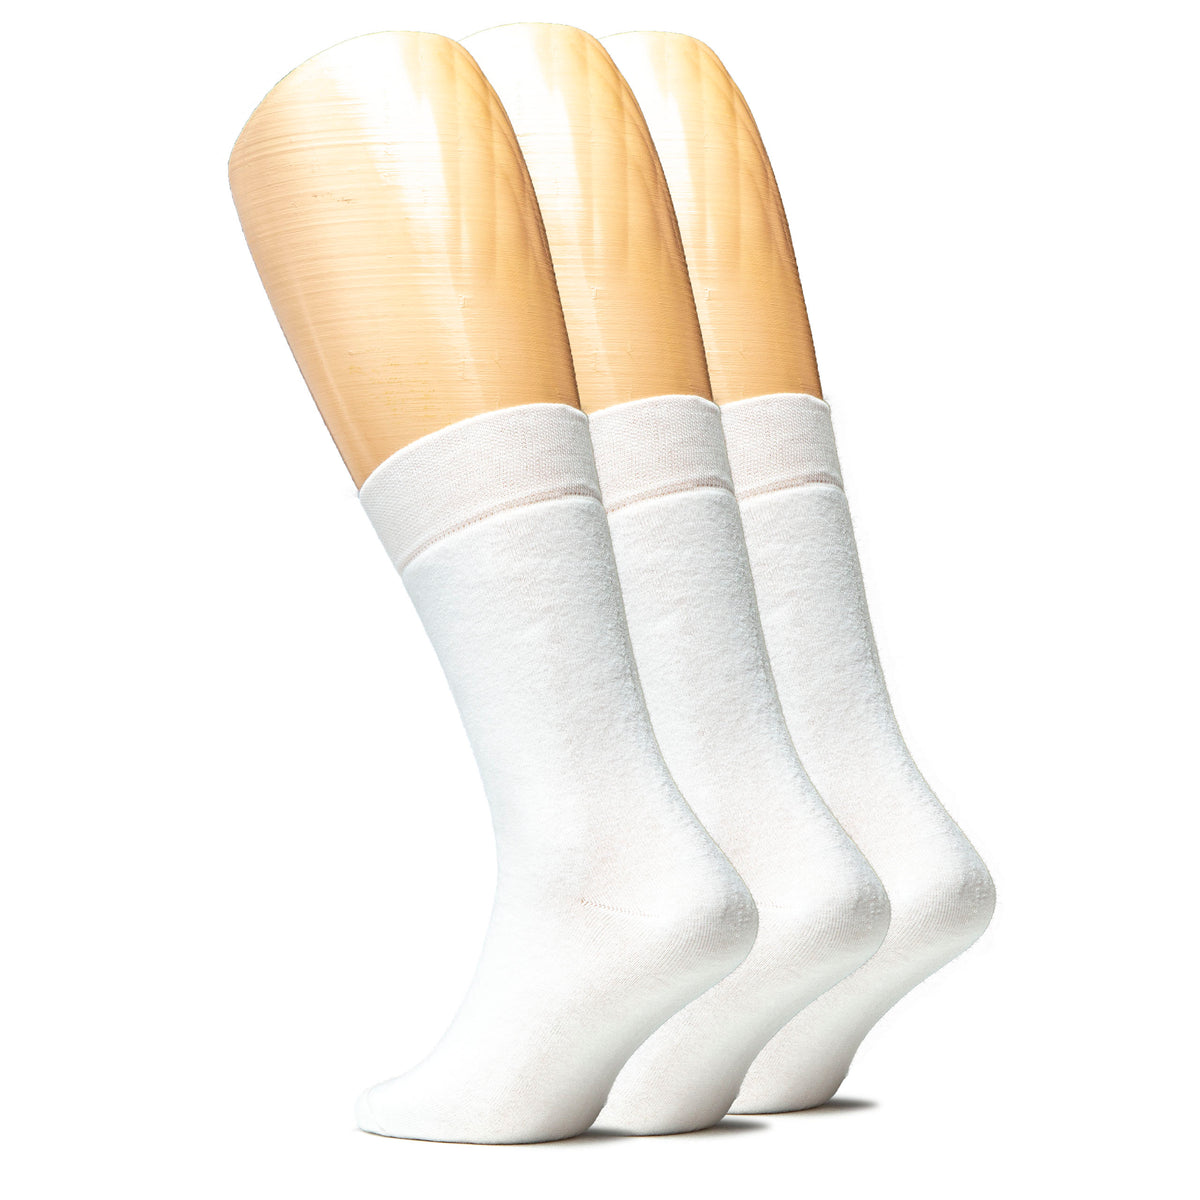 A mannequin displays three pairs of Men's Cotton Full Cushion Ankle Socks in white, perfect for everyday wear.